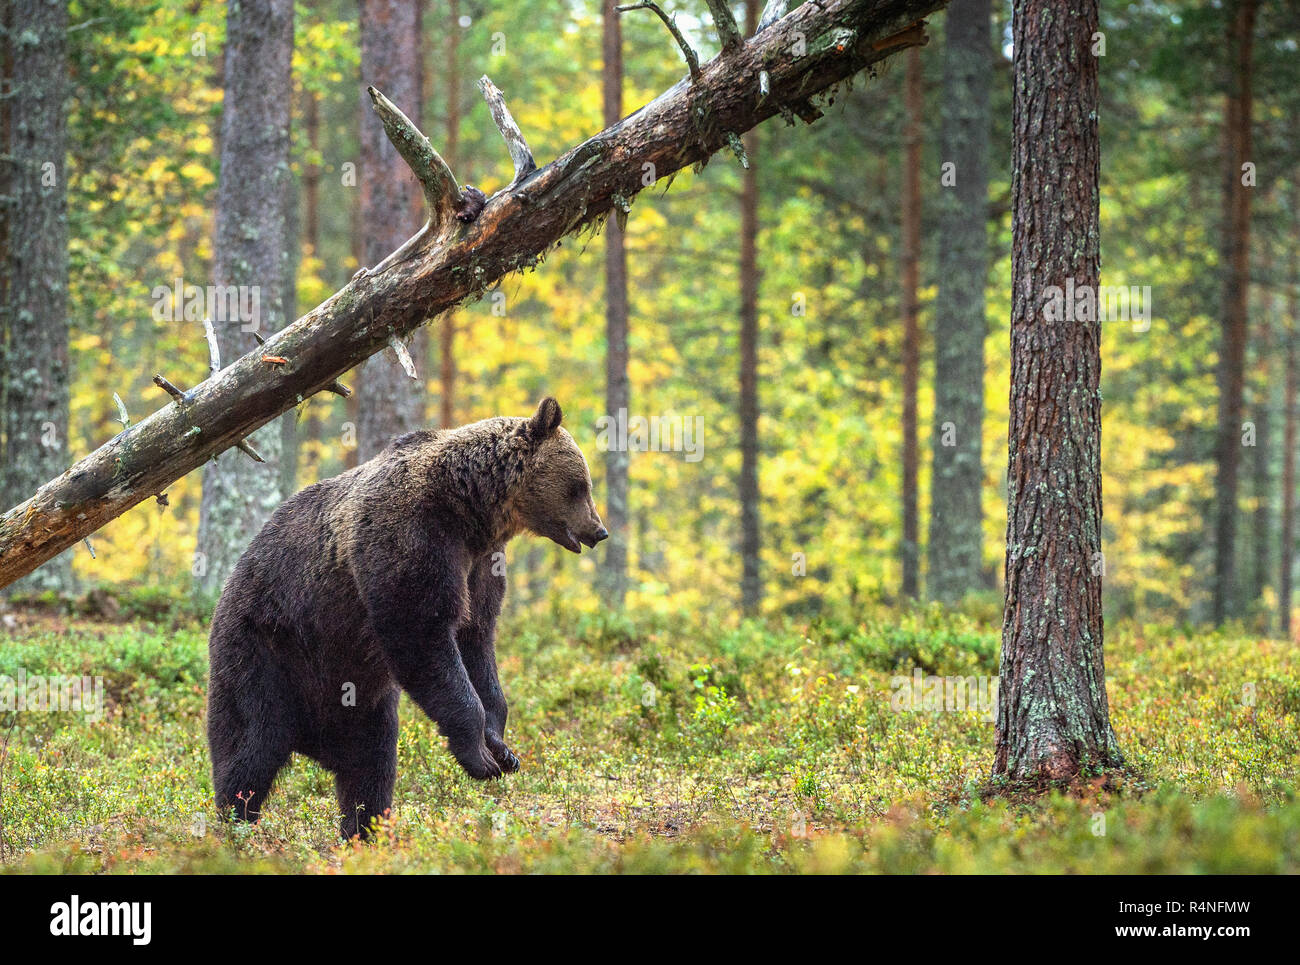 Brown bear standing on his hind legs in the autumn forest. Front view. Natural Habitat. Brown bear, scientific name: Ursus arctos. Stock Photo